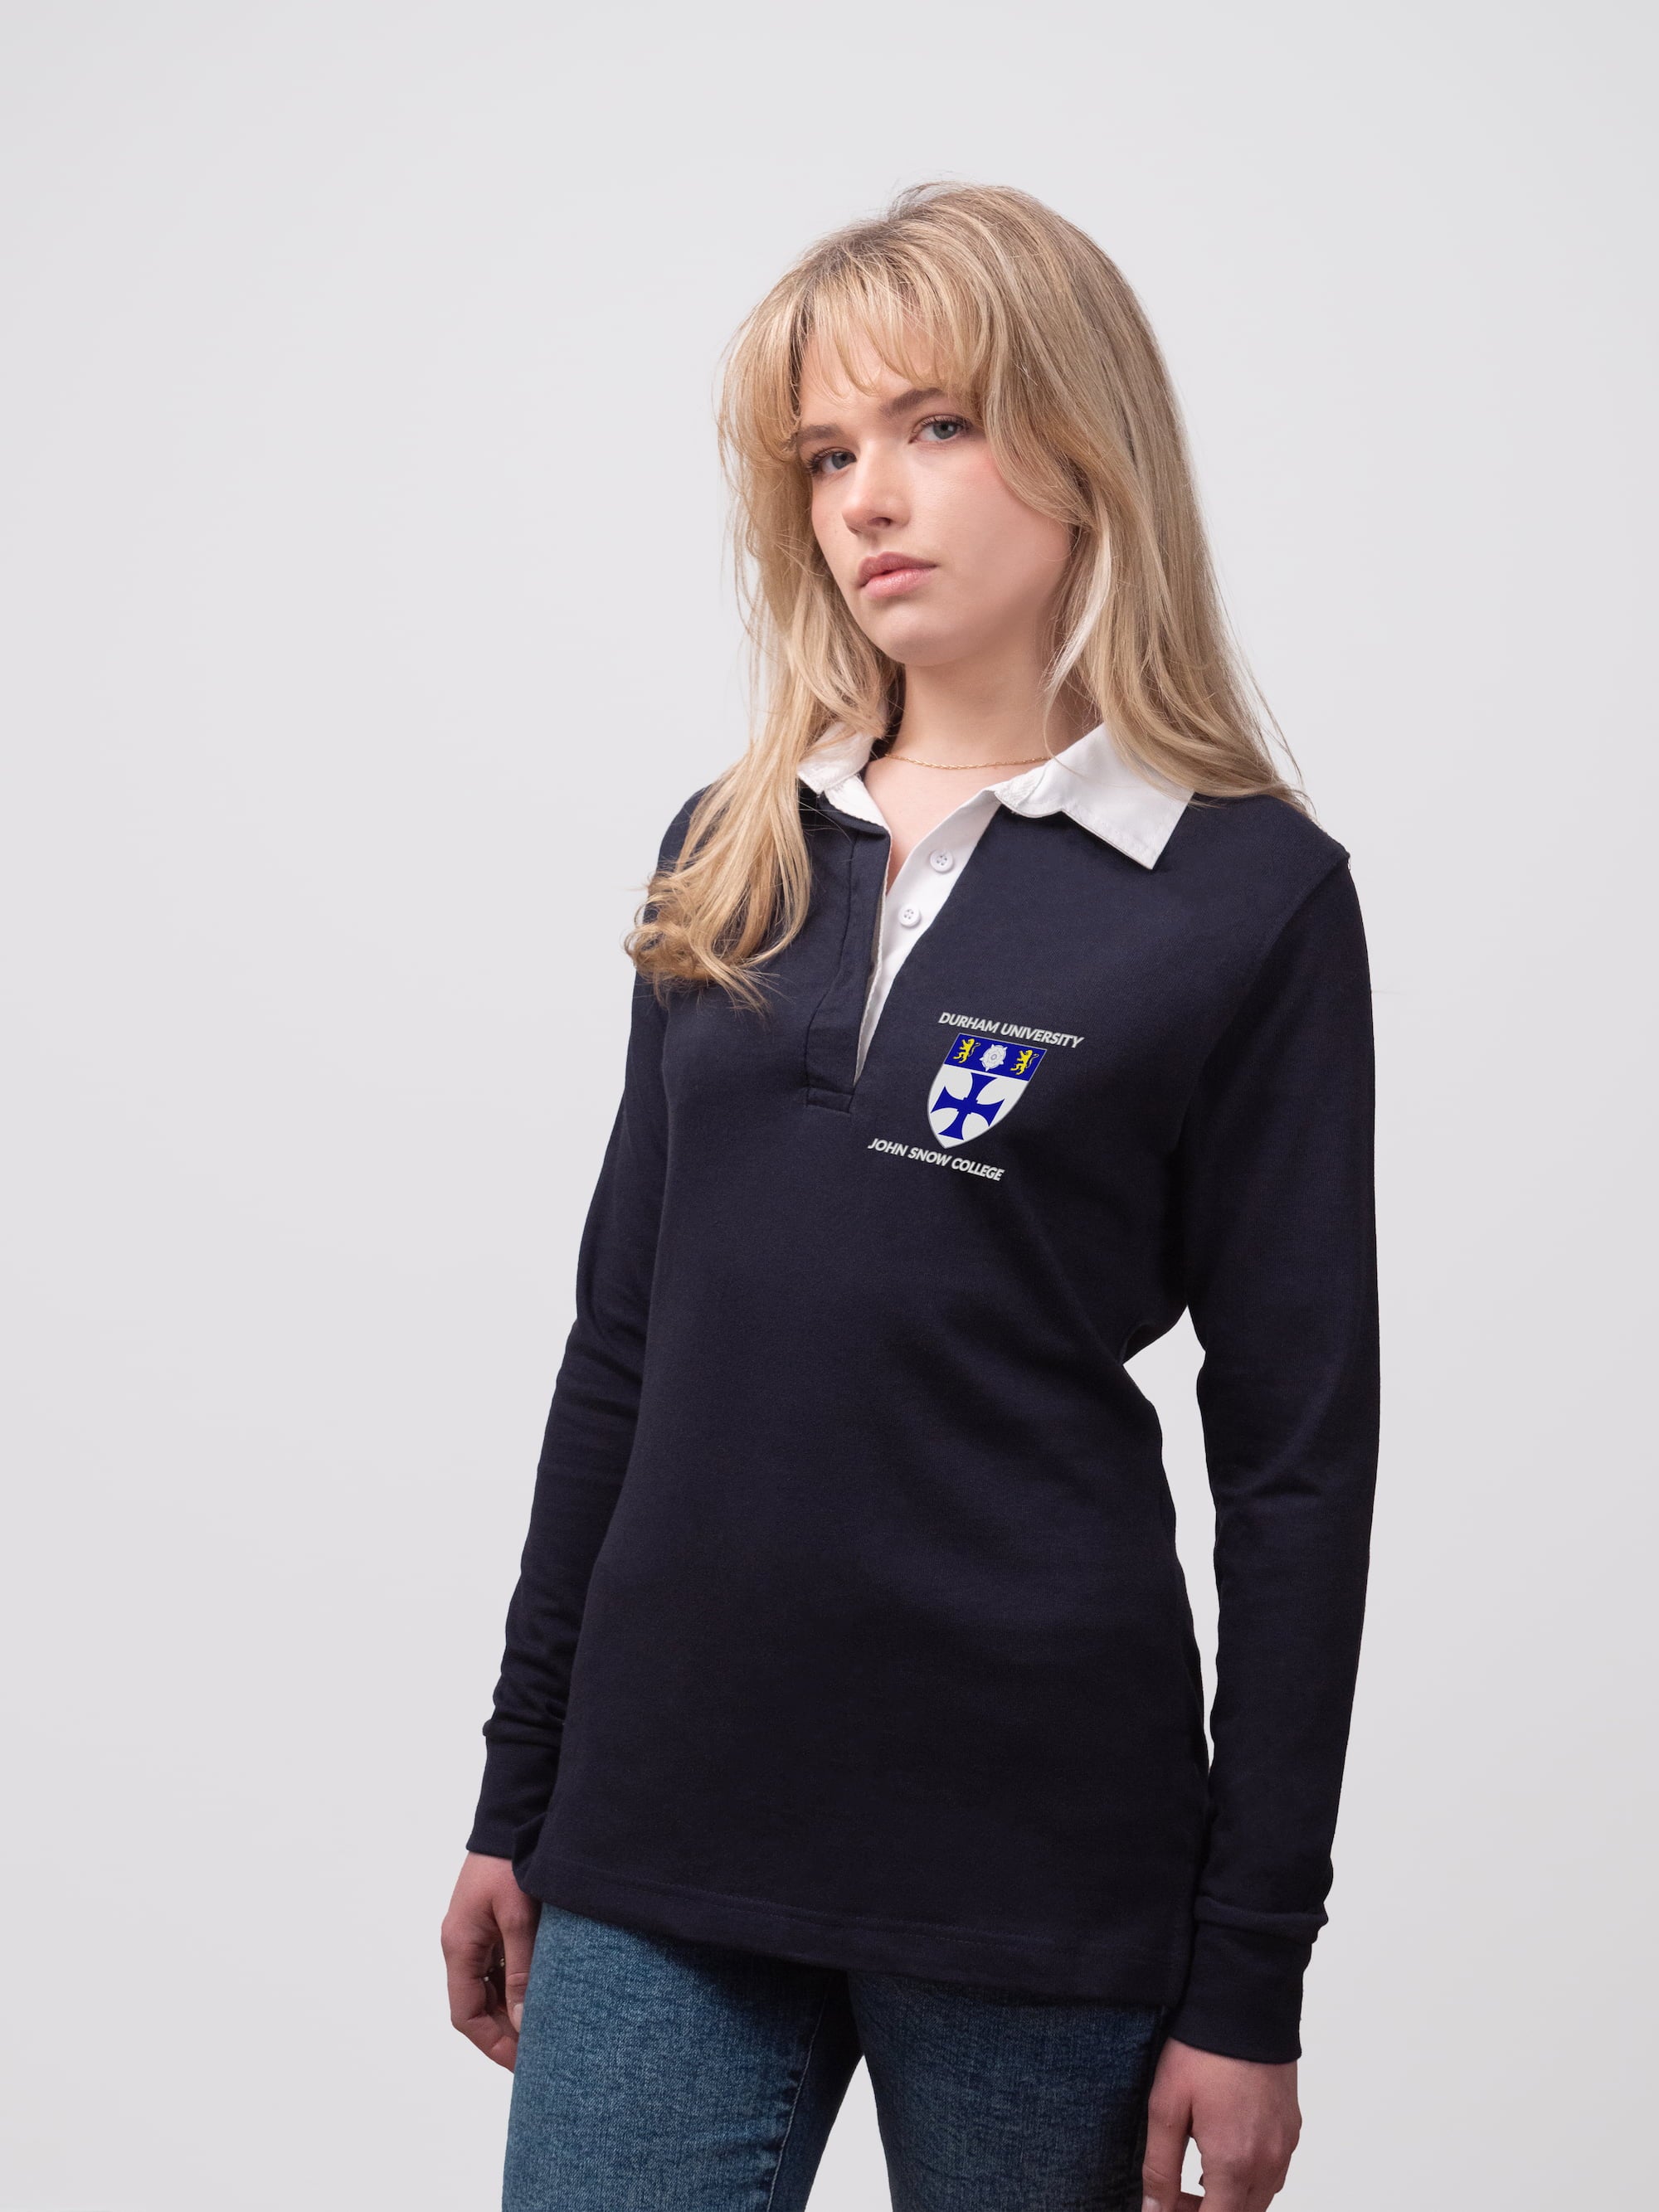 Student wearing a navy John Snow College rugby shirt with embroidered crest